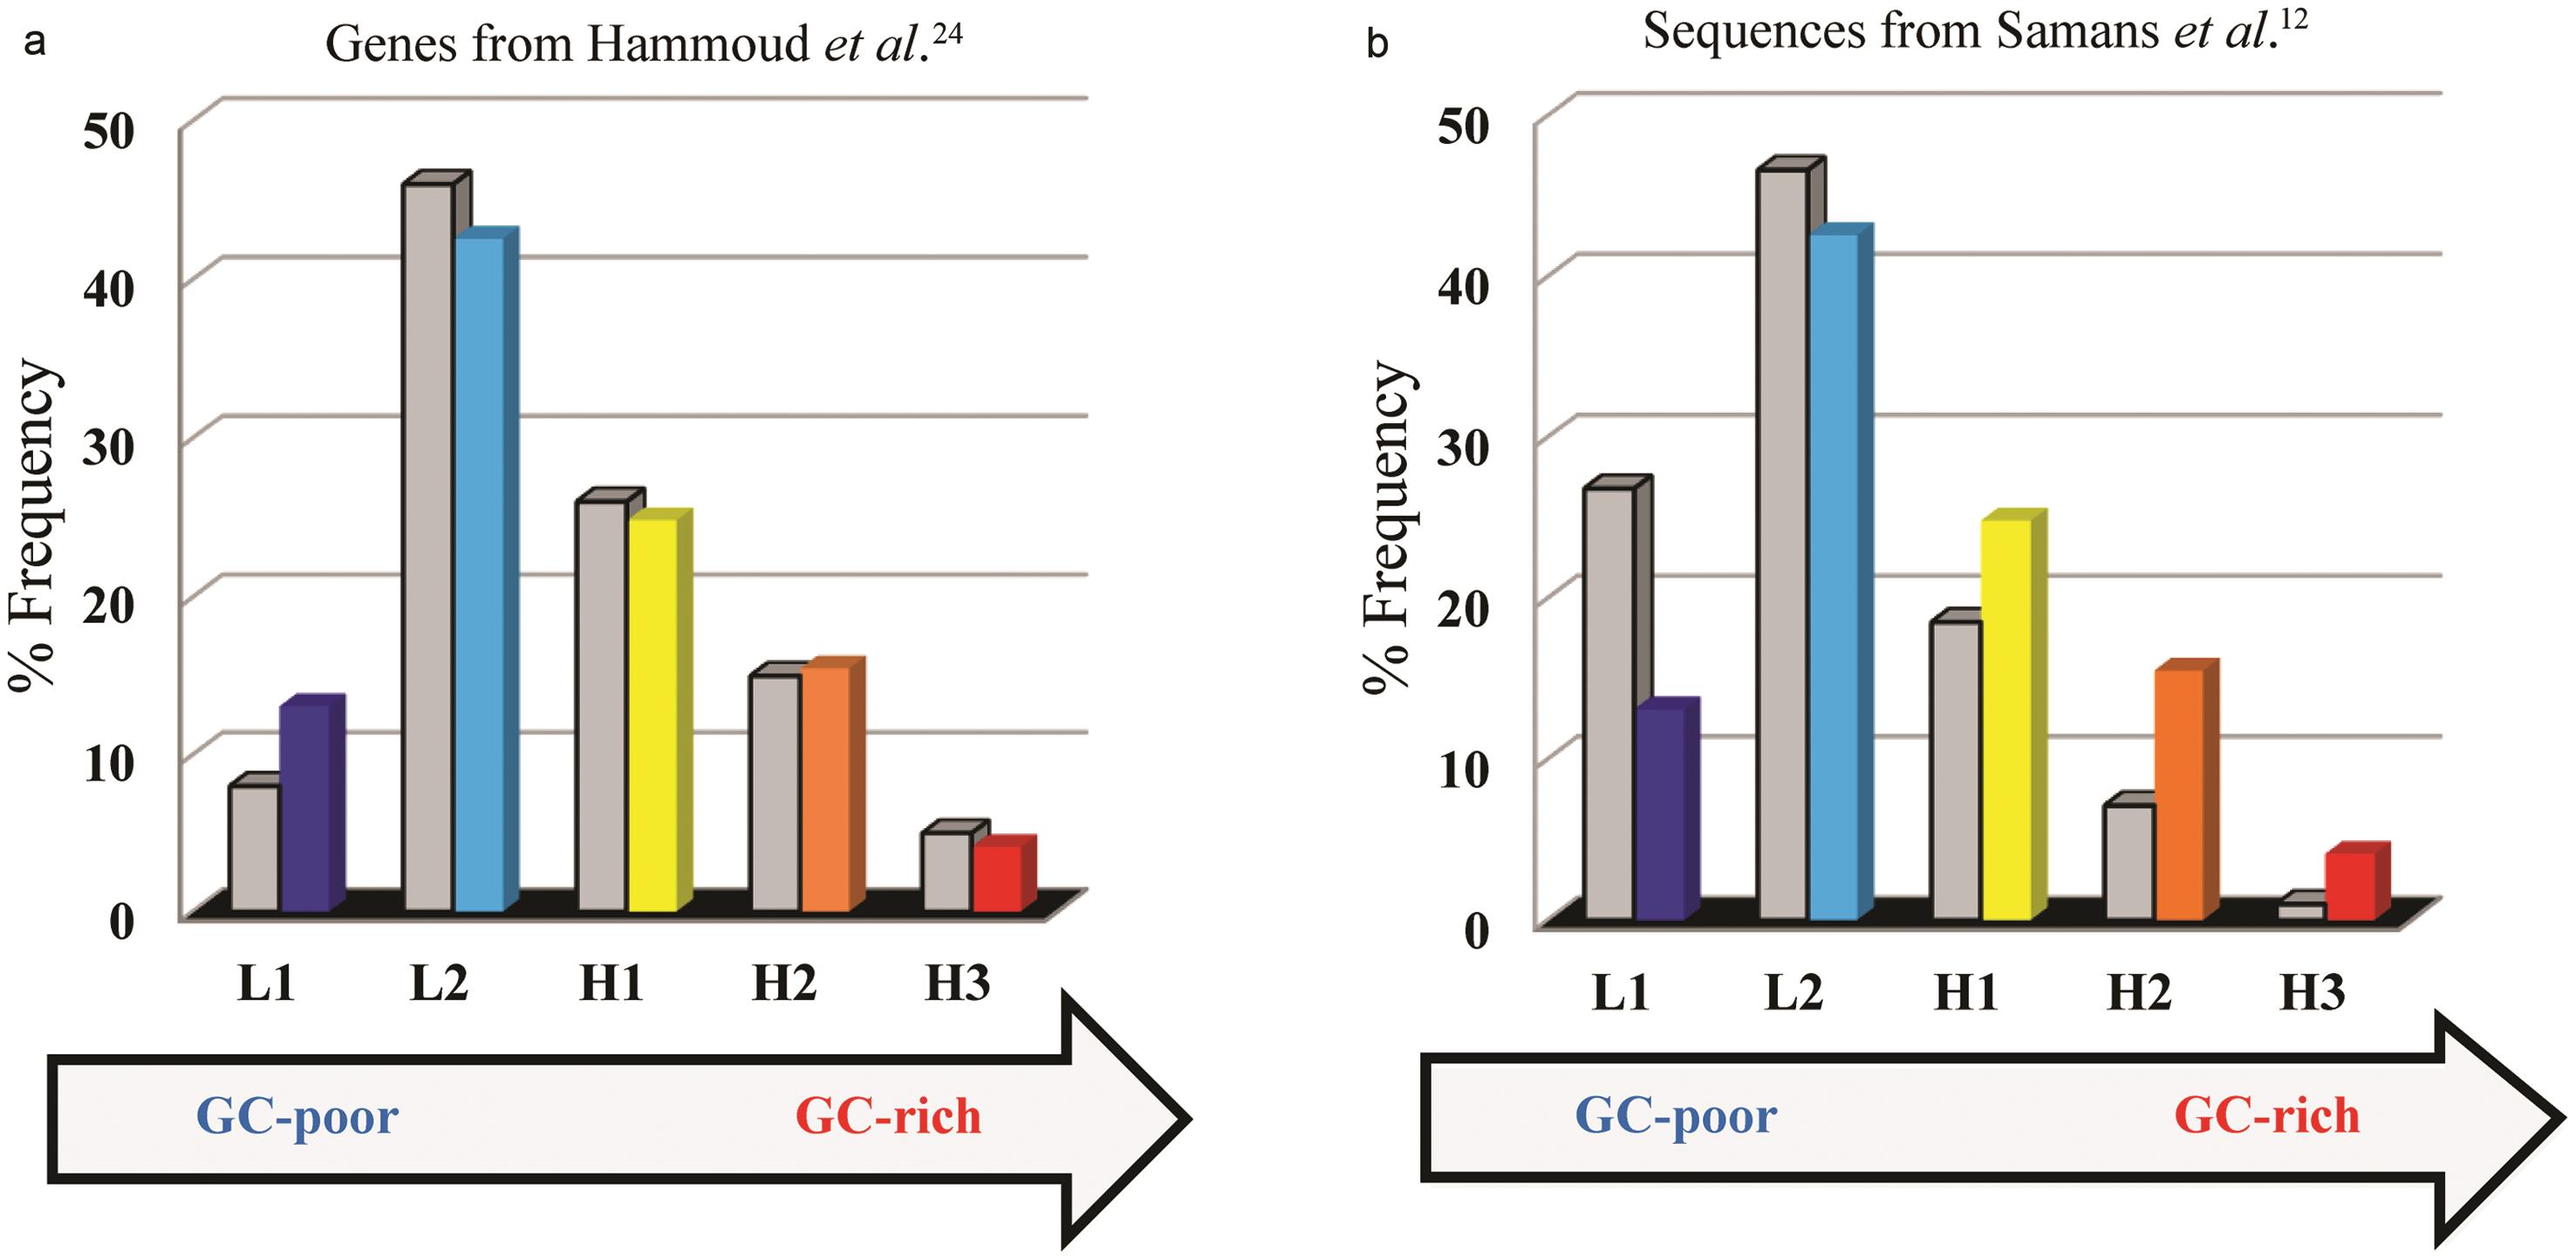 Distribution of genes and sequences from literature across human isochore families.